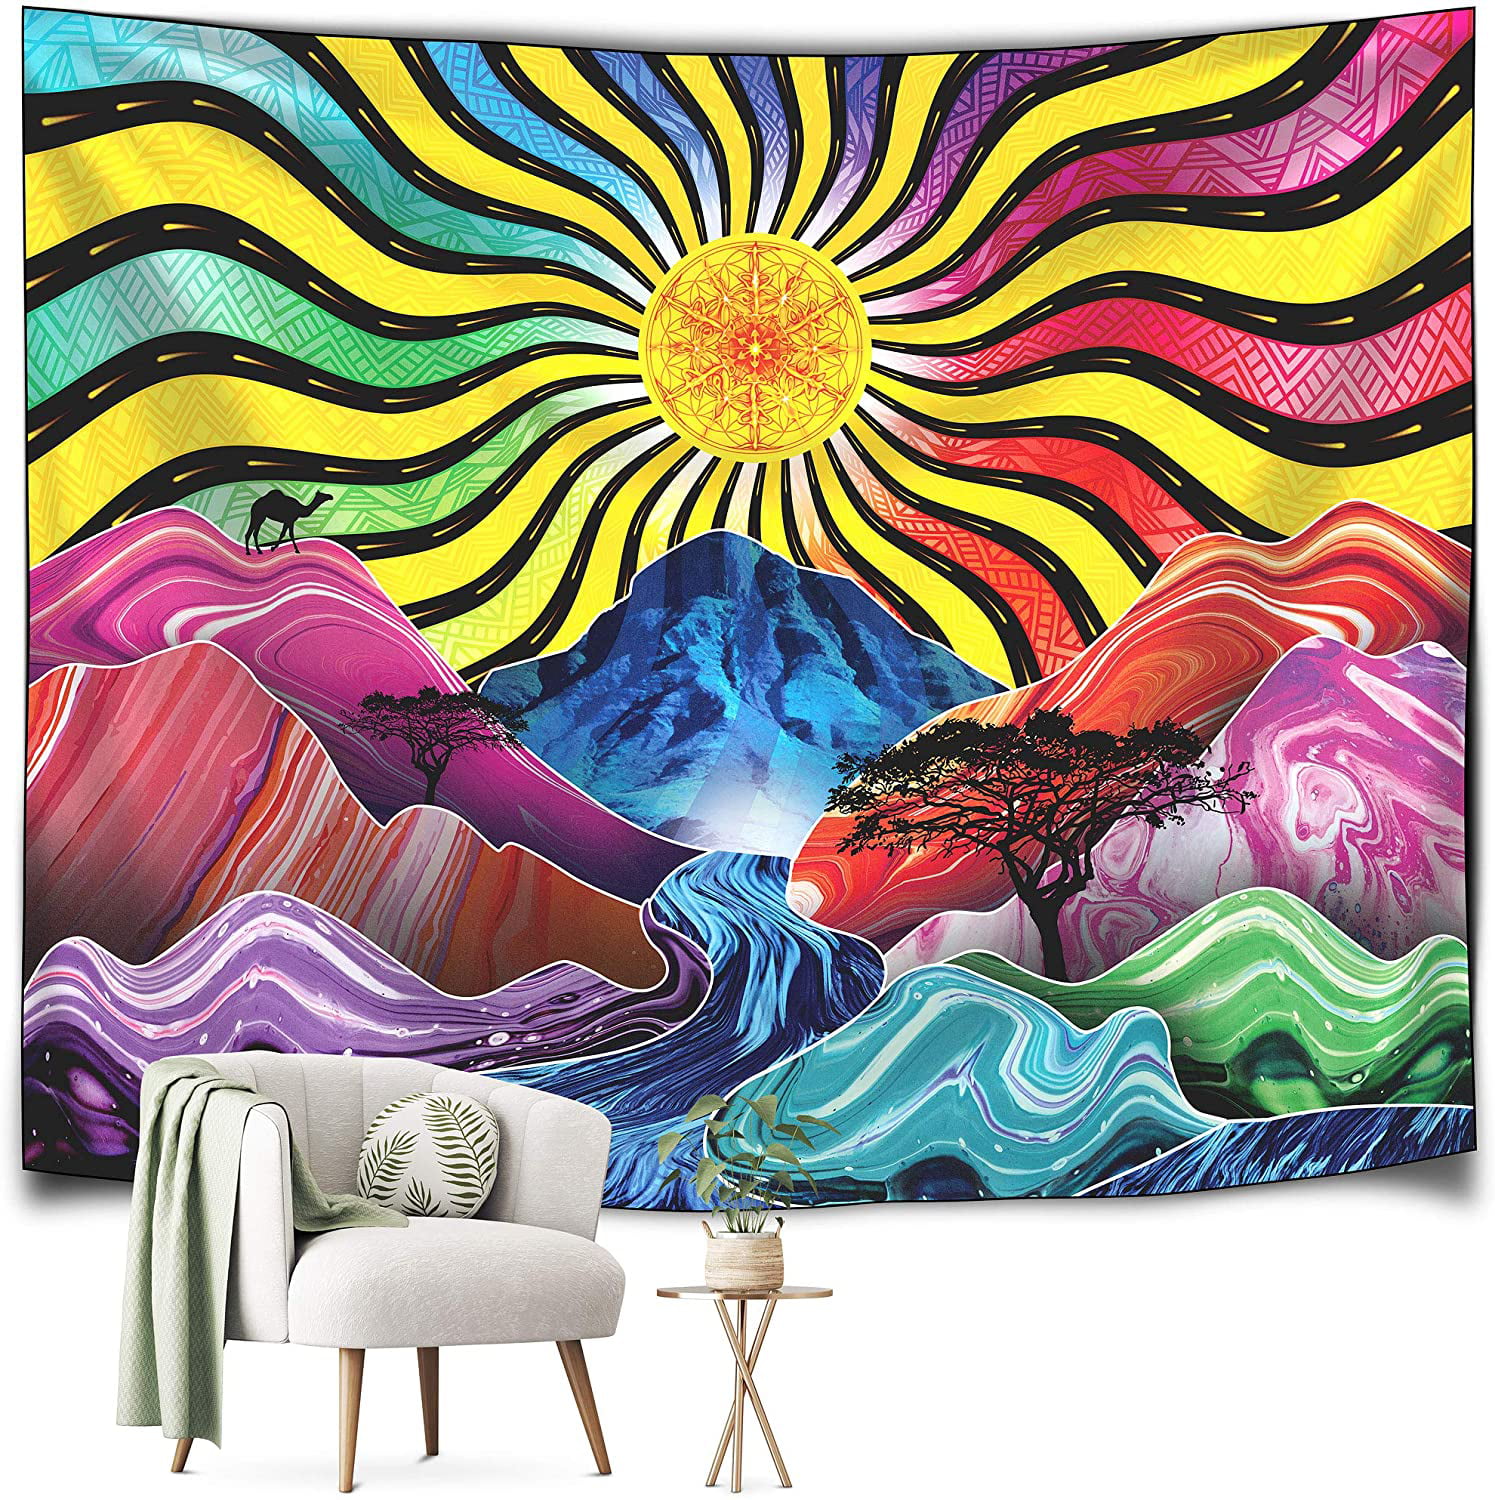 Psychedelic Hippie Window Tapestry Home Wall Hanging Scenery Tapestry Art Decor 